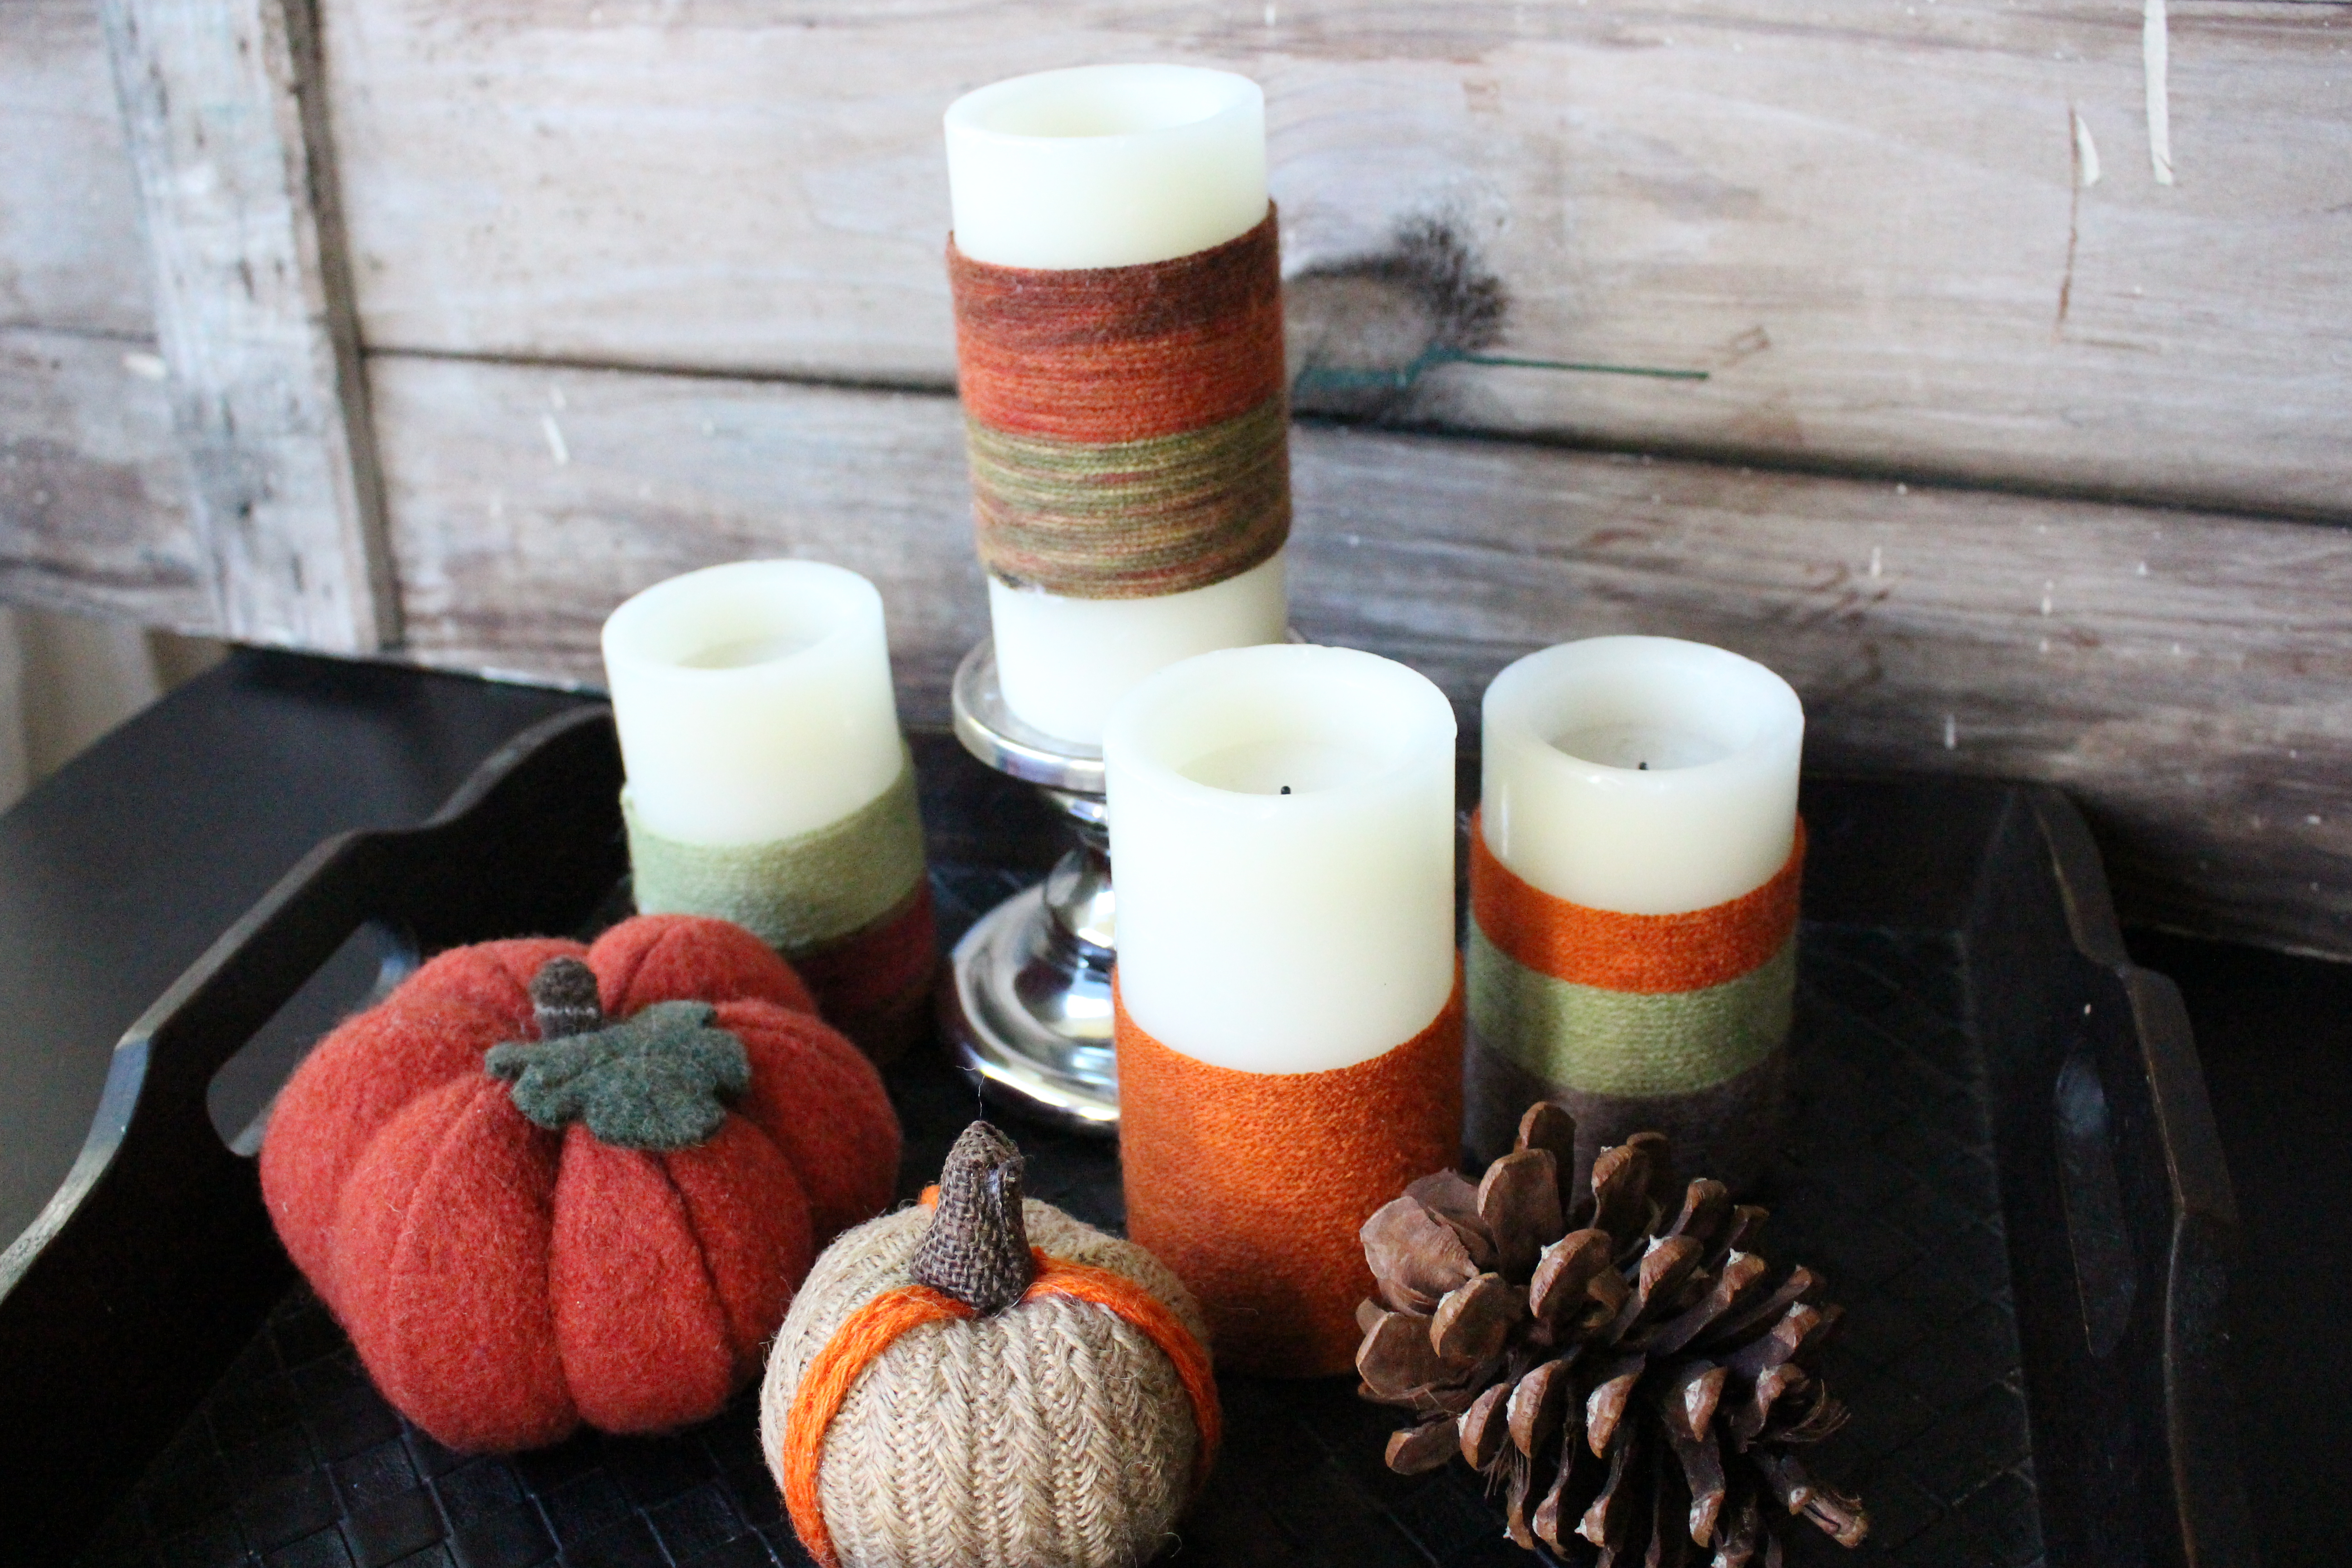 Sneak Peek of Home for Fall eBook | crafts and inspiration for fall | seasonal ideas | autumn decor and crafts | 